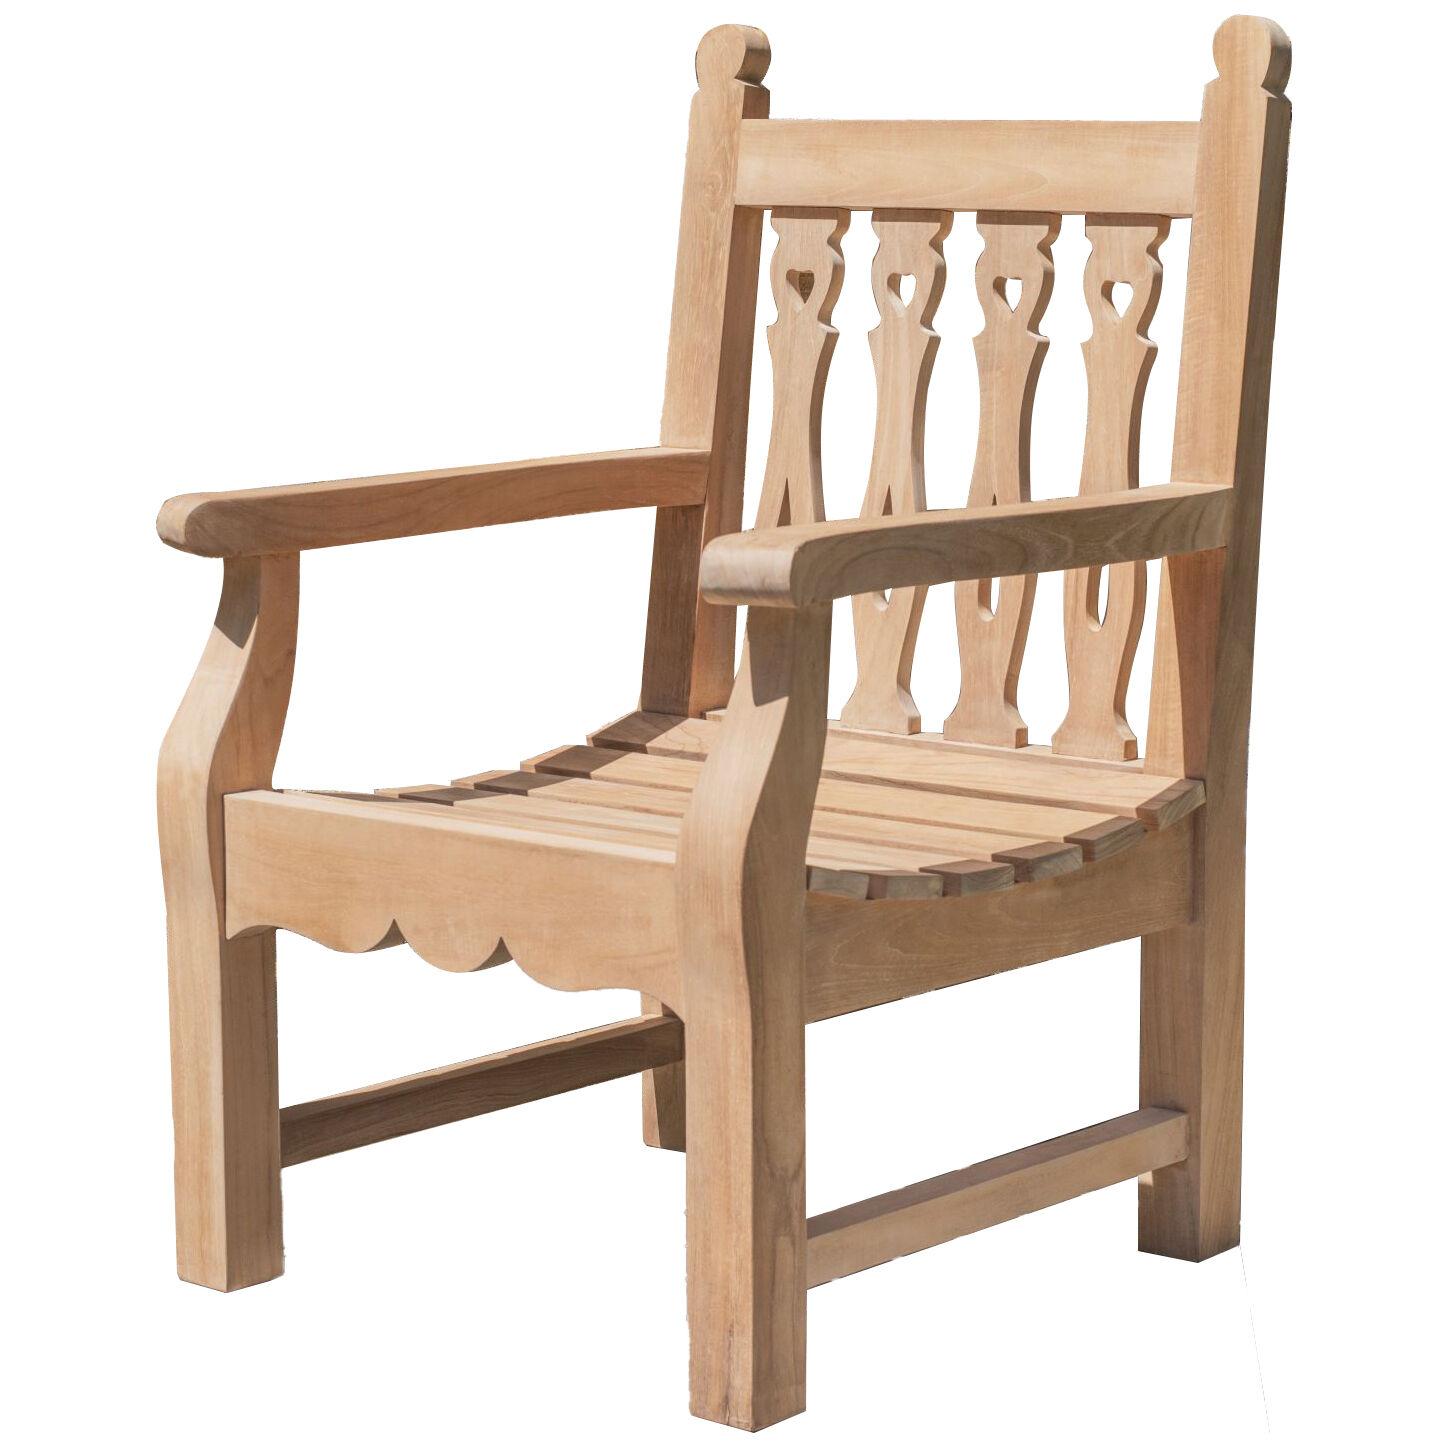 The Branksome Park Dining Chair